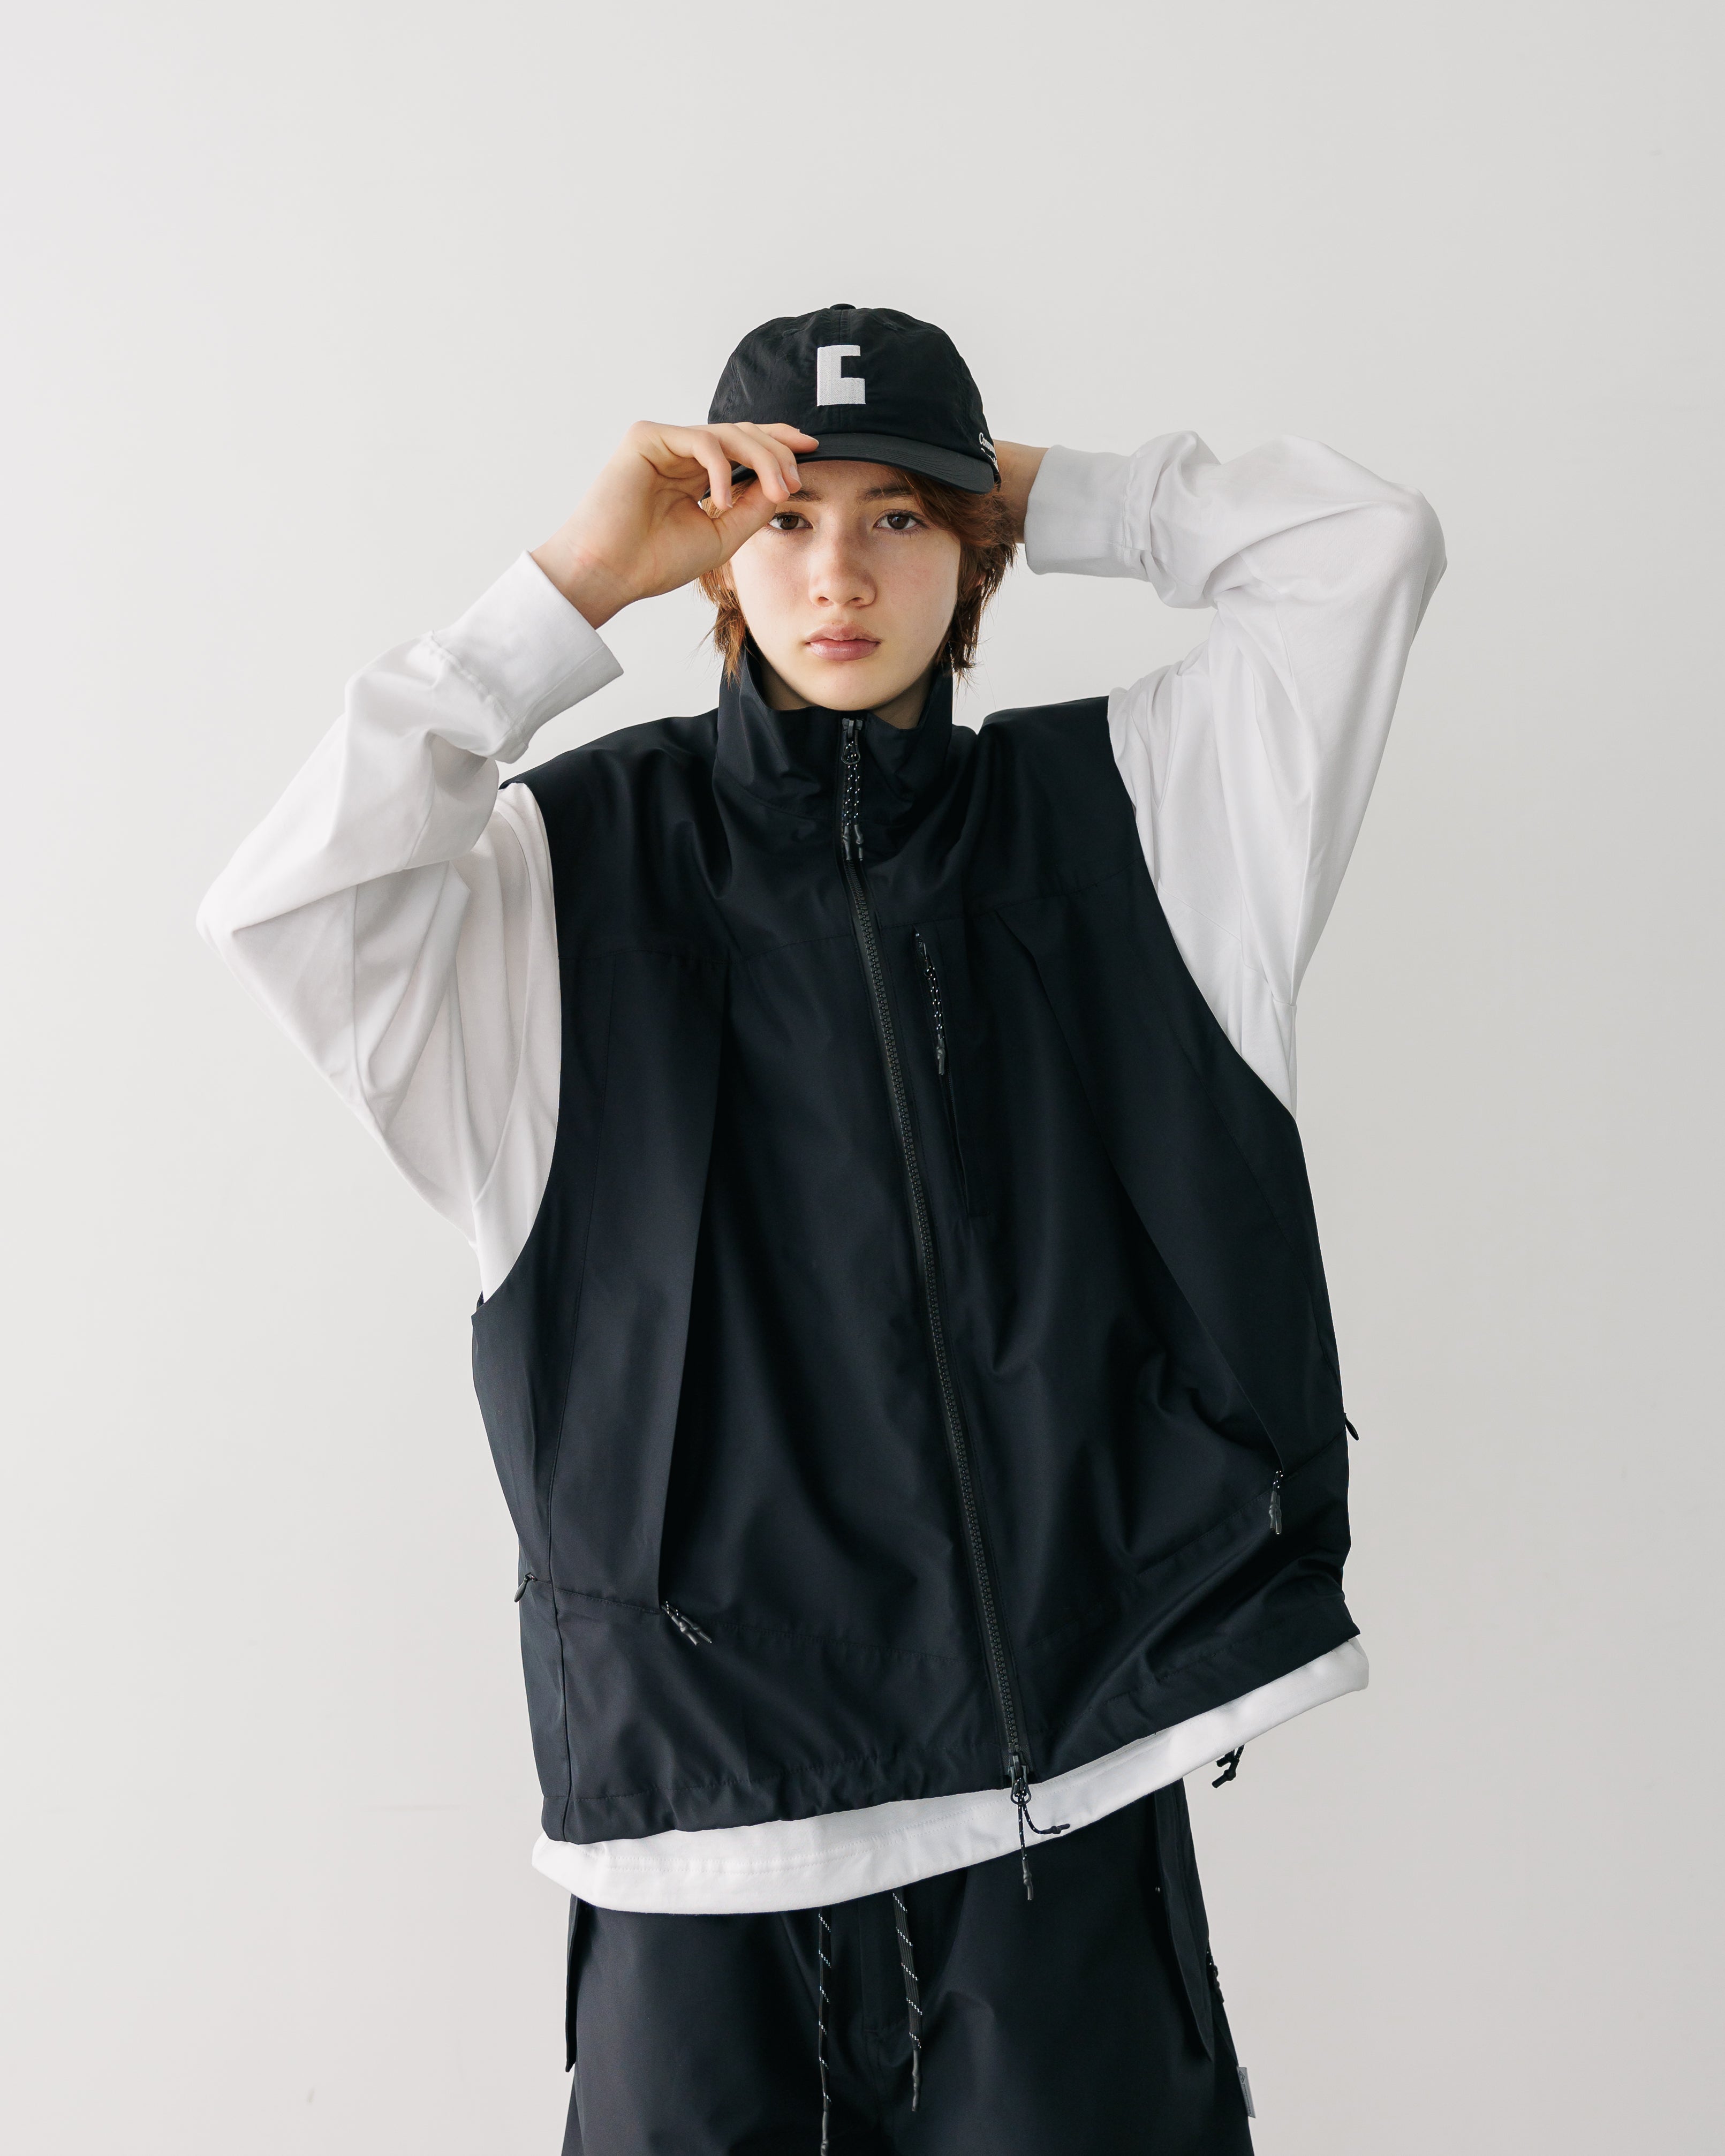 5.1 WED 20:00- In stock】+phenix WINDSTOPPER® by GORE-TEX LABS CITY VE